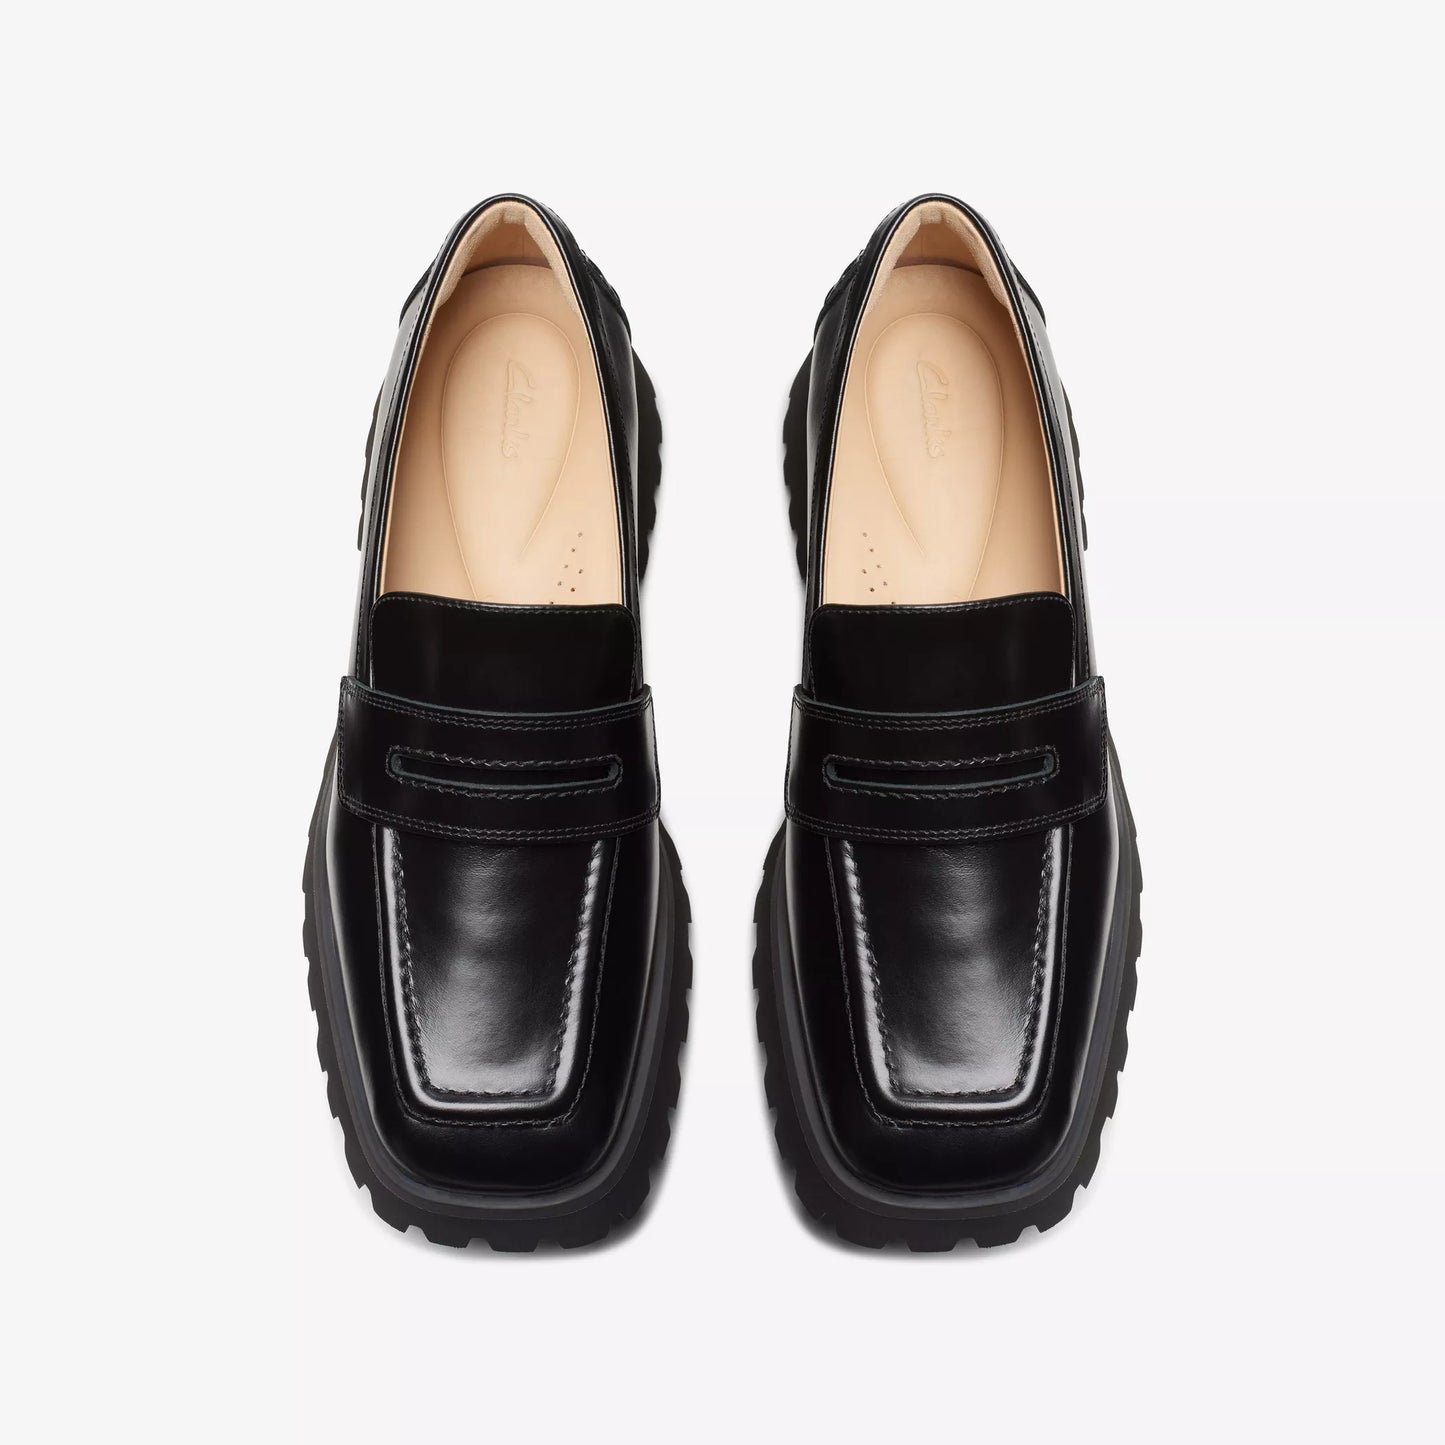 Clarks Stayso Edge Loafer - Black Leather